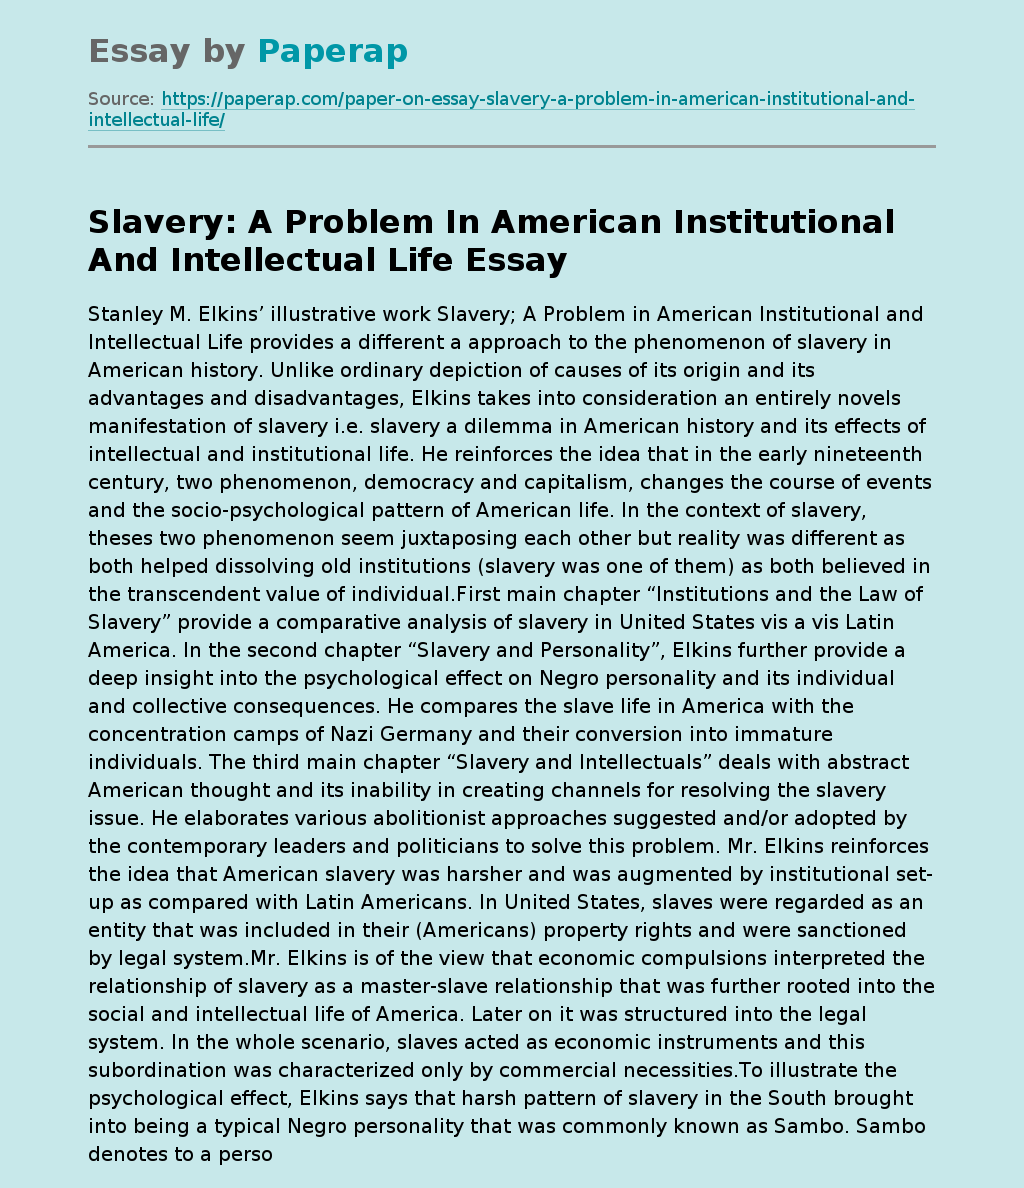 Slavery: A Problem In American Institutional And Intellectual Life